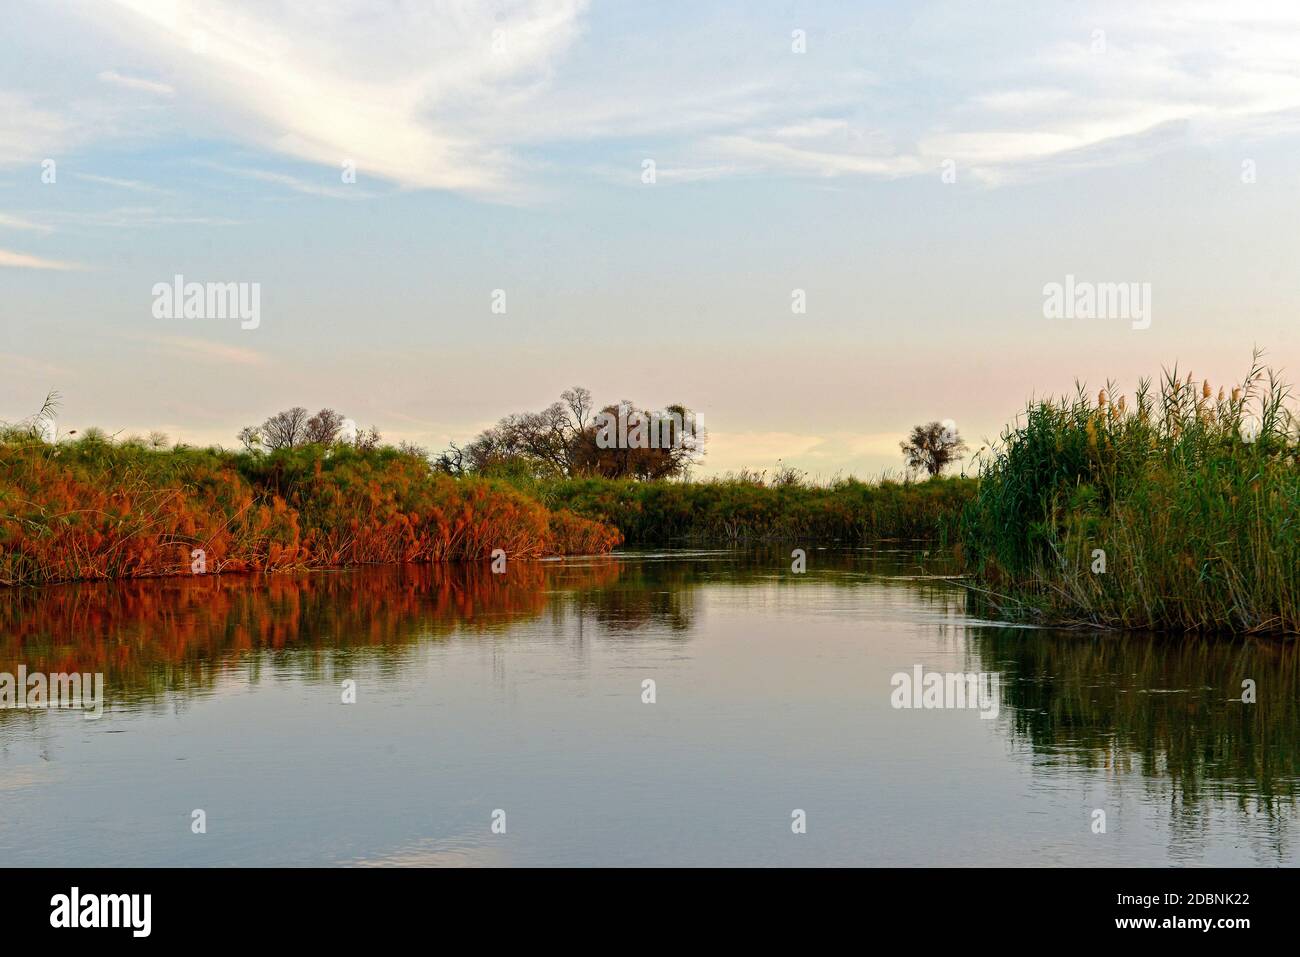 River trip on the Kwando River in the Caprivi region, Namibia Stock Photo